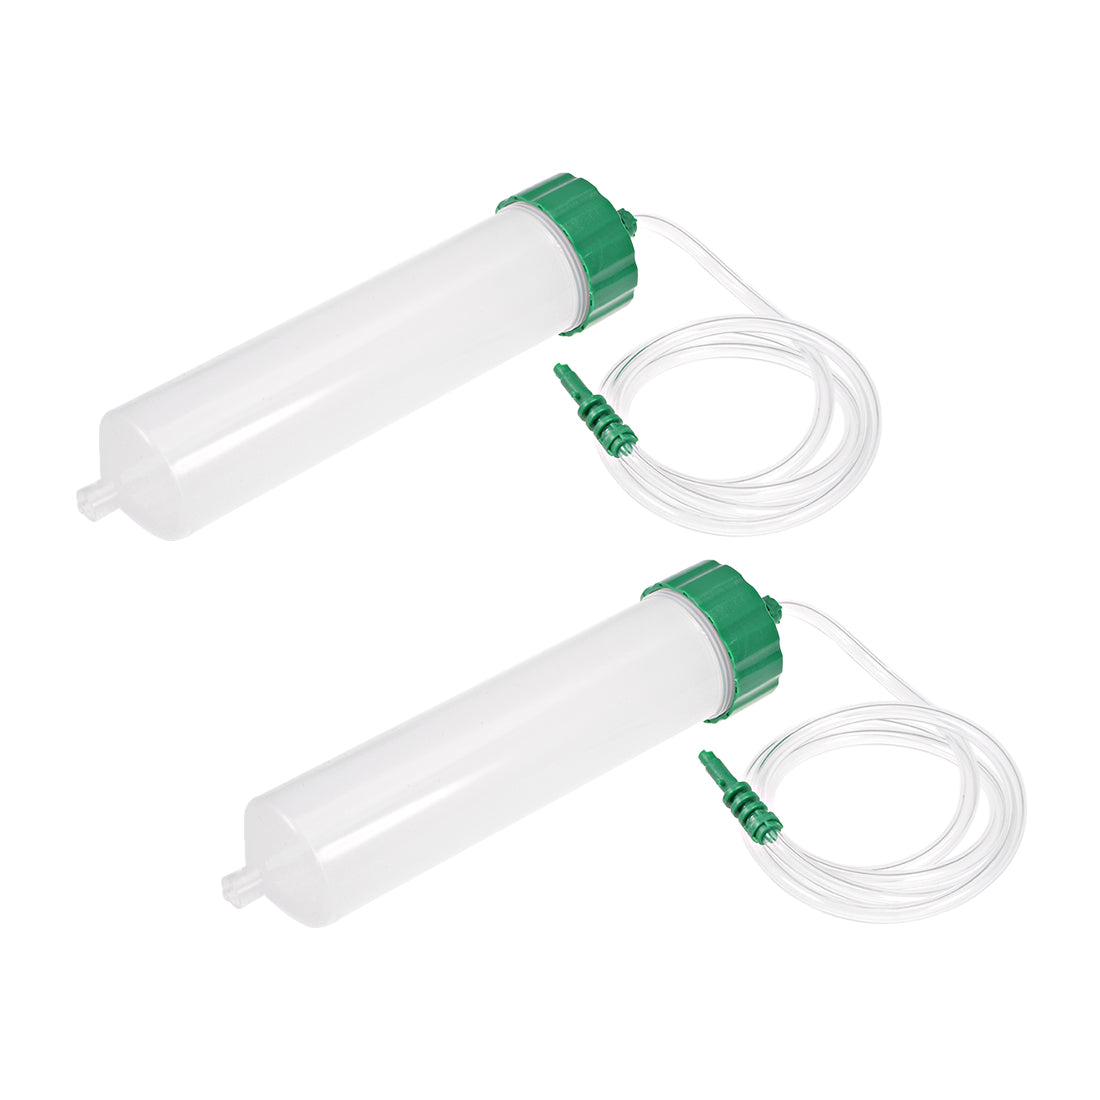 uxcell Uxcell Air Tubing Glue Dispenser Syringes 200cc Clear w Adapter for Industrial, 2 Pcs (Plastic Cover)